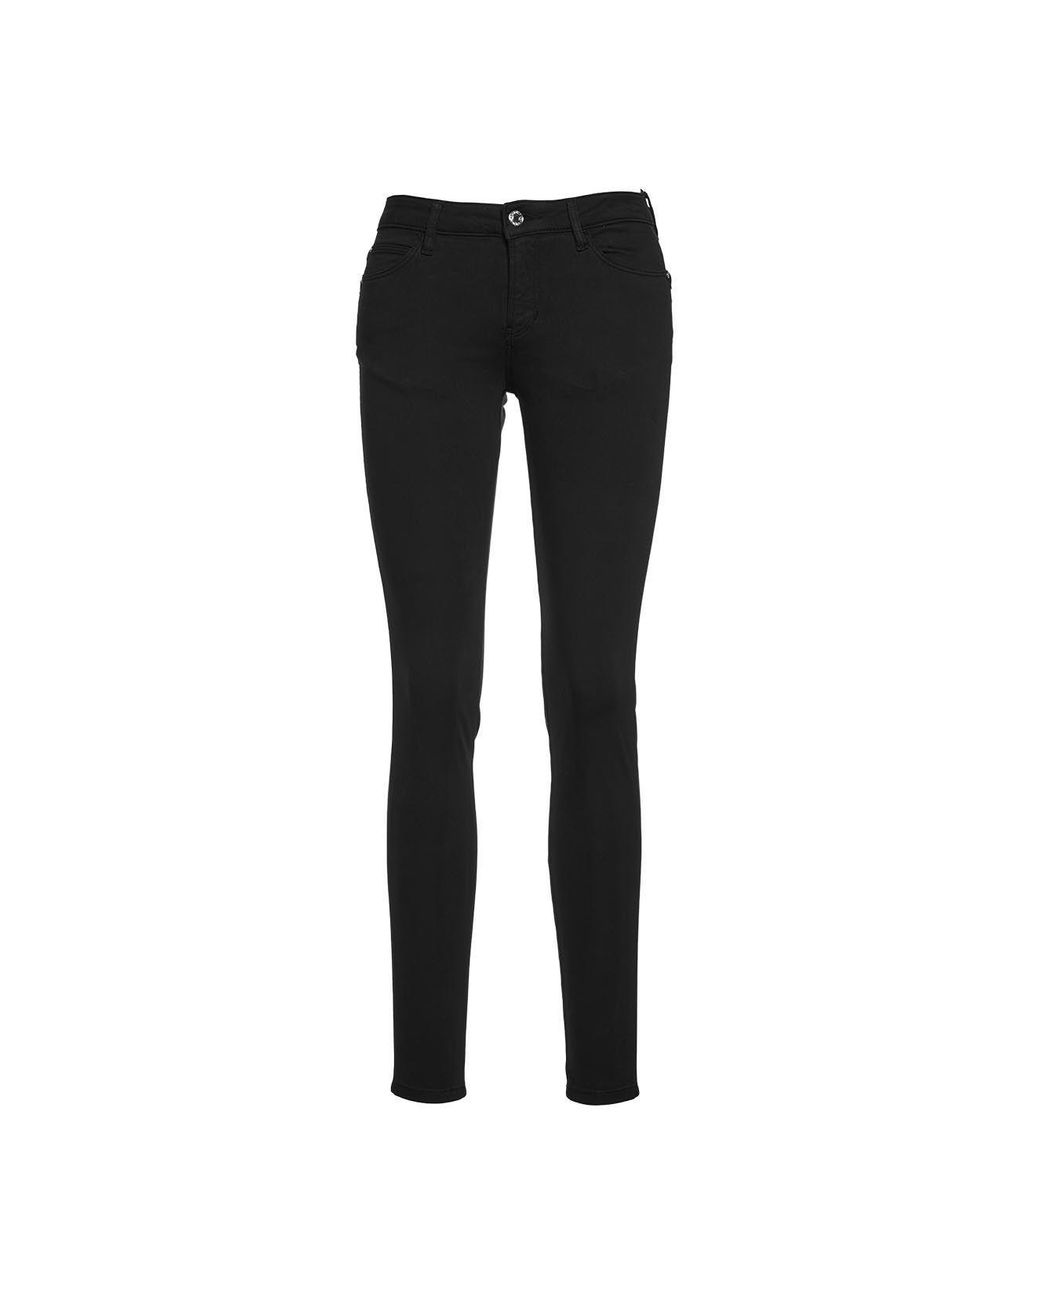 Guess Other Materials Pants in Black - Lyst